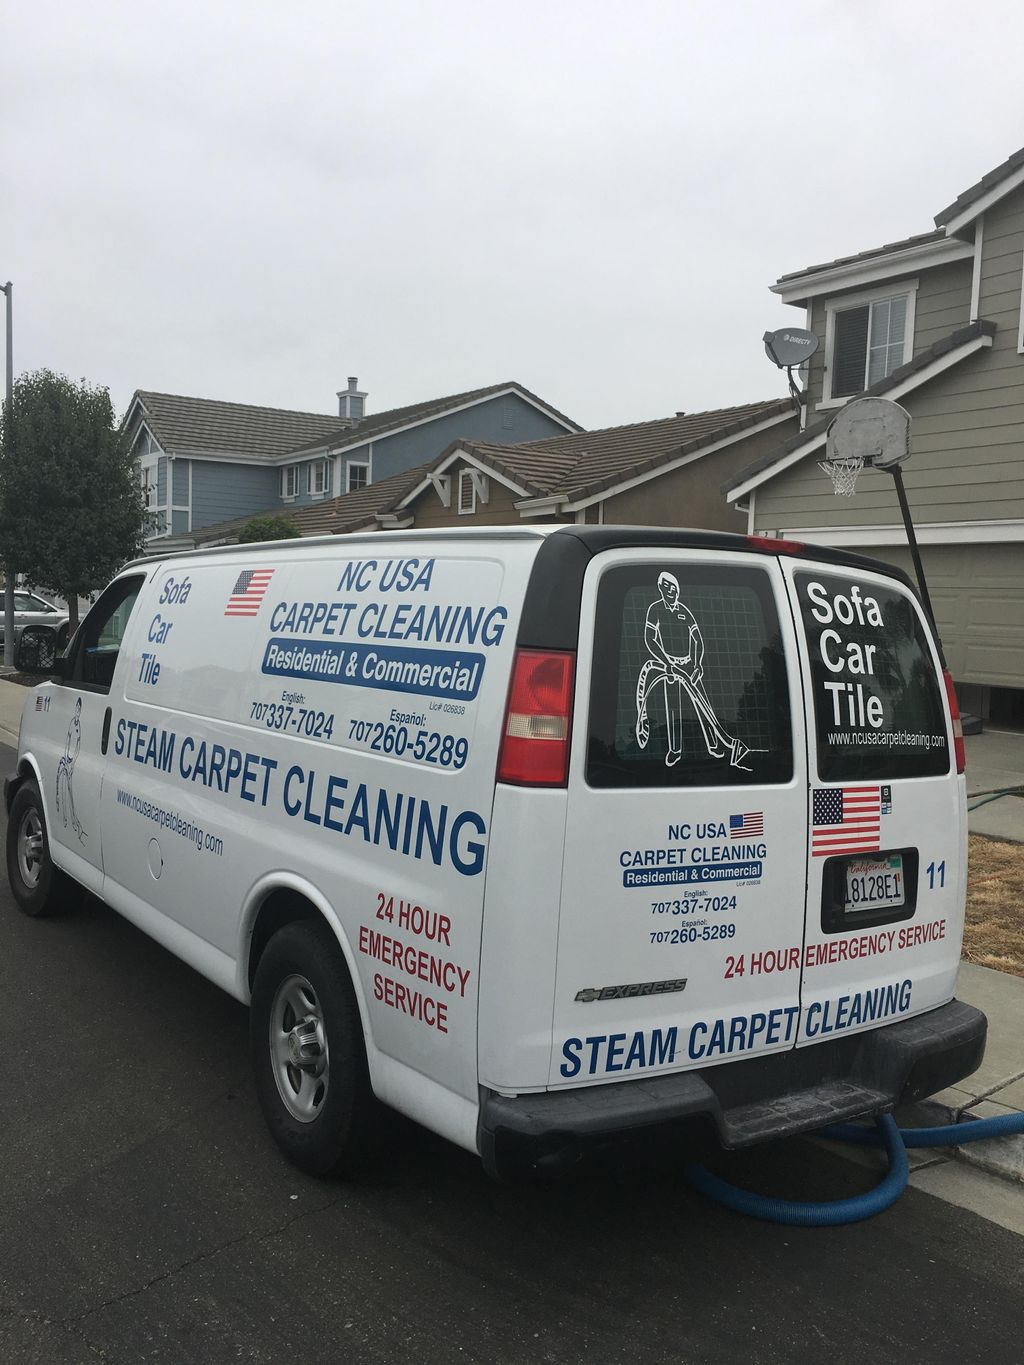 NC USA Carpet Cleaning